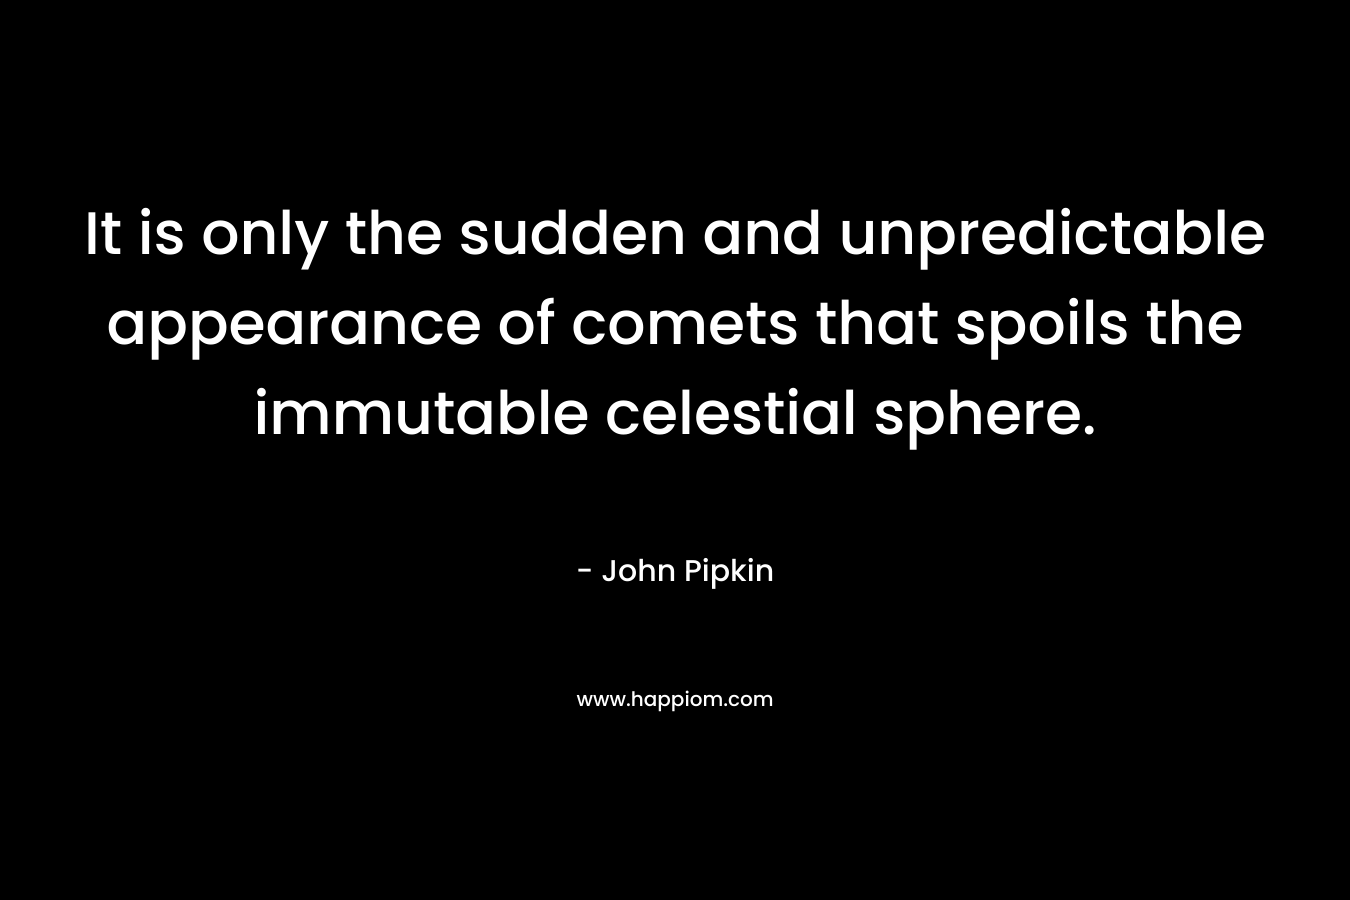 It is only the sudden and unpredictable appearance of comets that spoils the immutable celestial sphere.